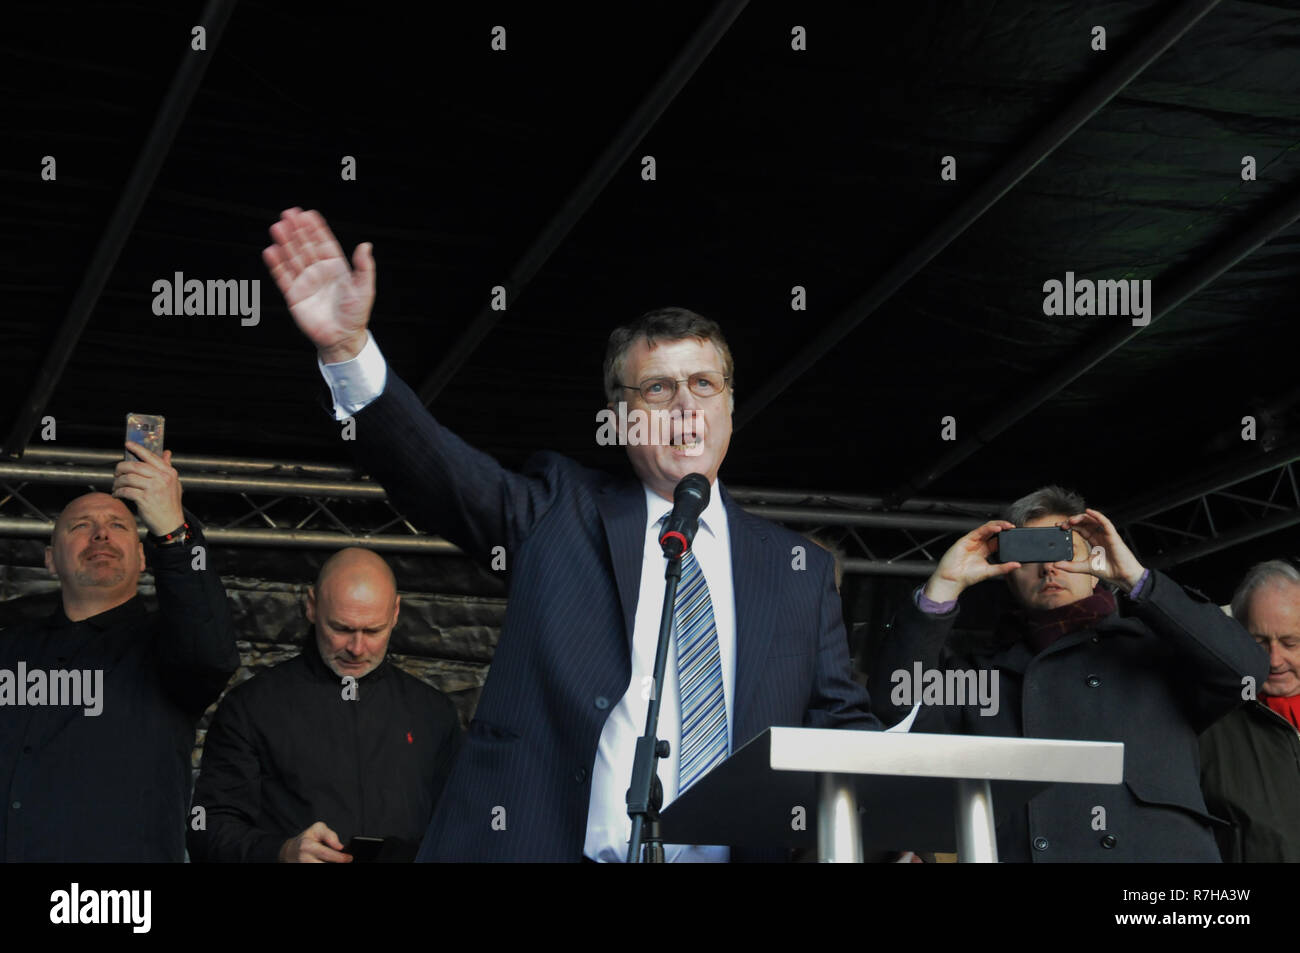 London, UK. 09th Dec, 2018. Ukip leader, Gerard Batten, addresses Ukip supporters in London. Ukip and leave the EU voters are angry with PM Theresa May's poor exit deal with Europe. Credit: Dario Earl/Alamy Live News Stock Photo